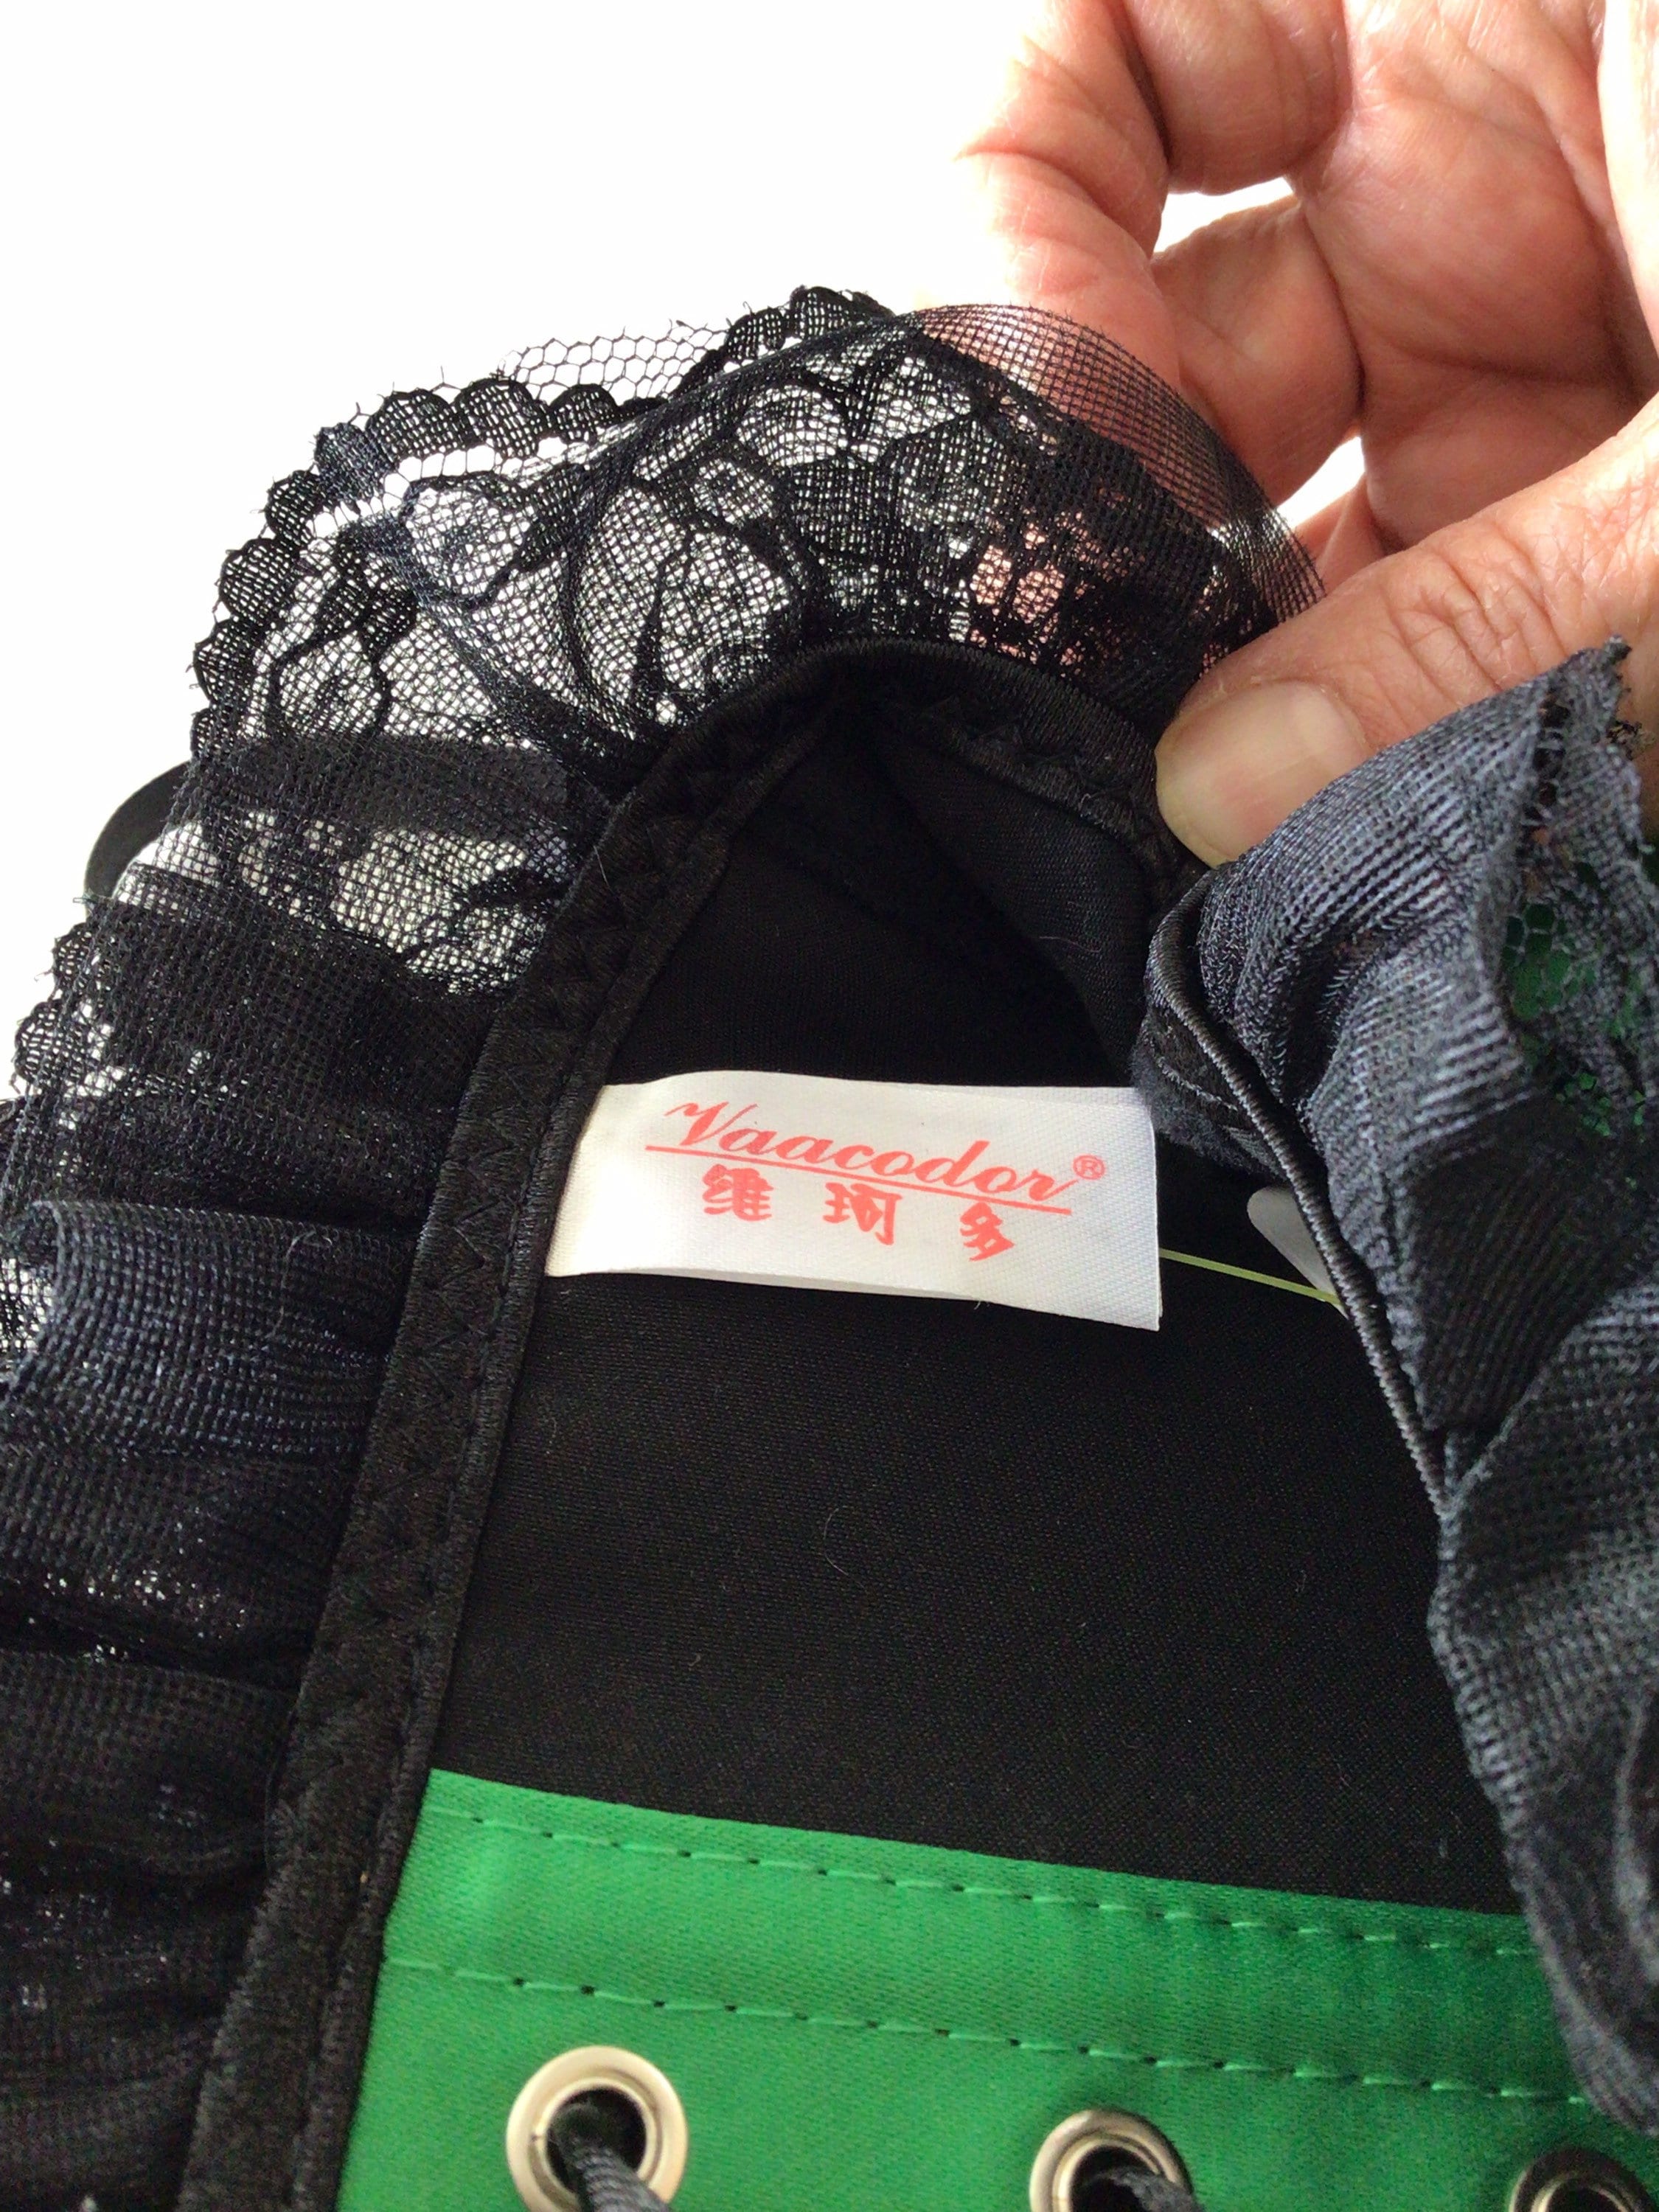 90s Vaacodor Bustier Black Green Lace Ribbon Lace-up Corset 